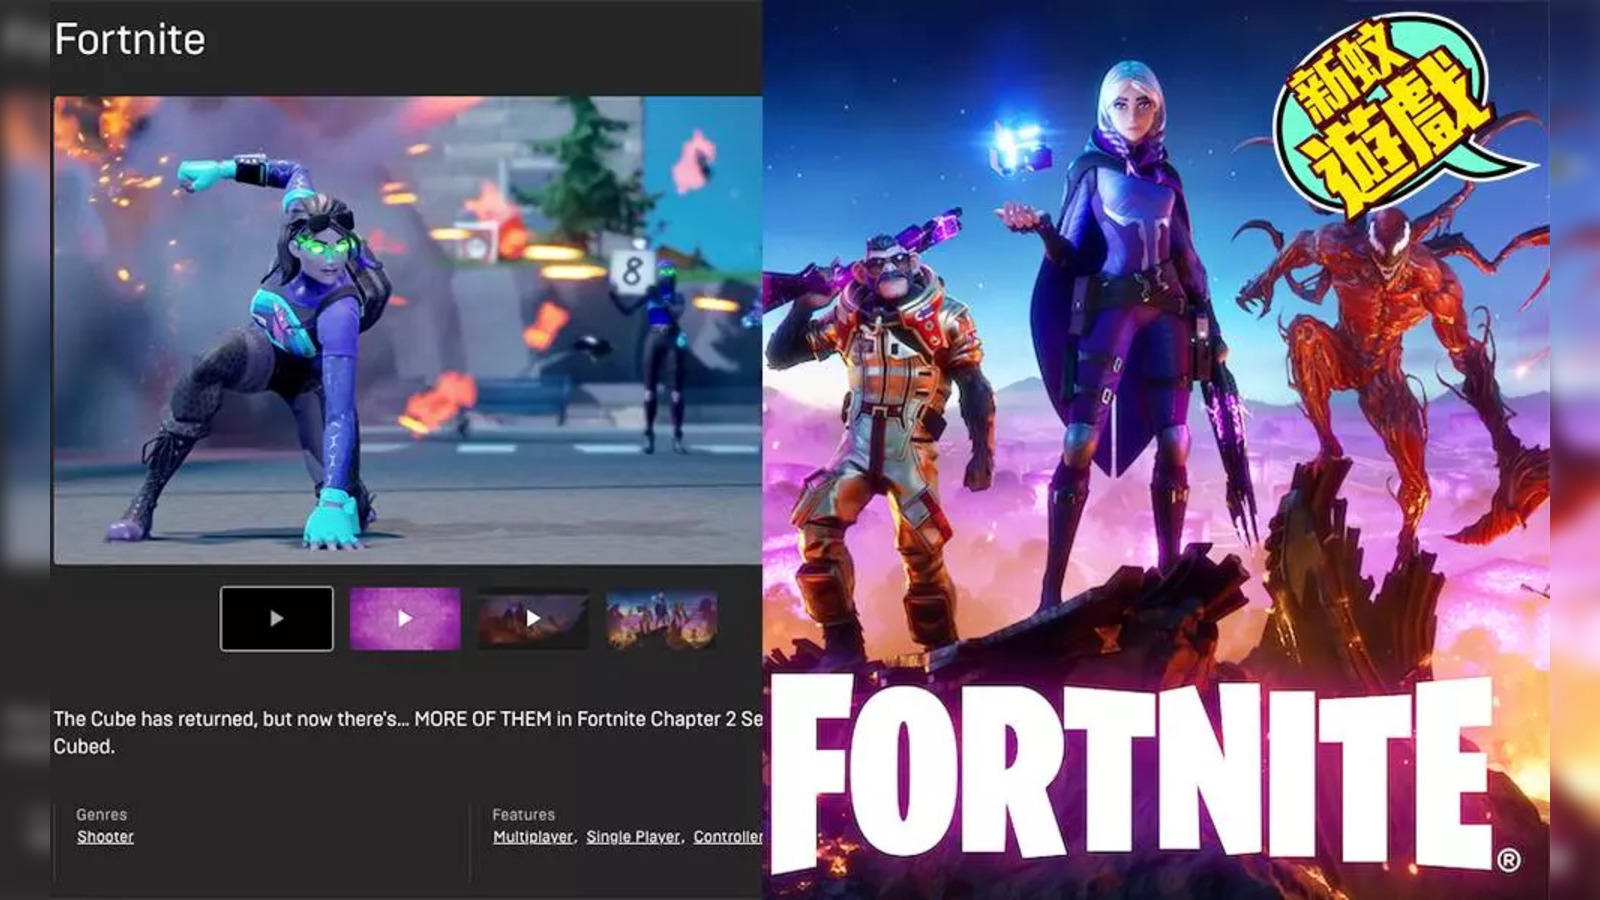 Epic Confirms Plans to Bring the Epic Games Store to Mobile